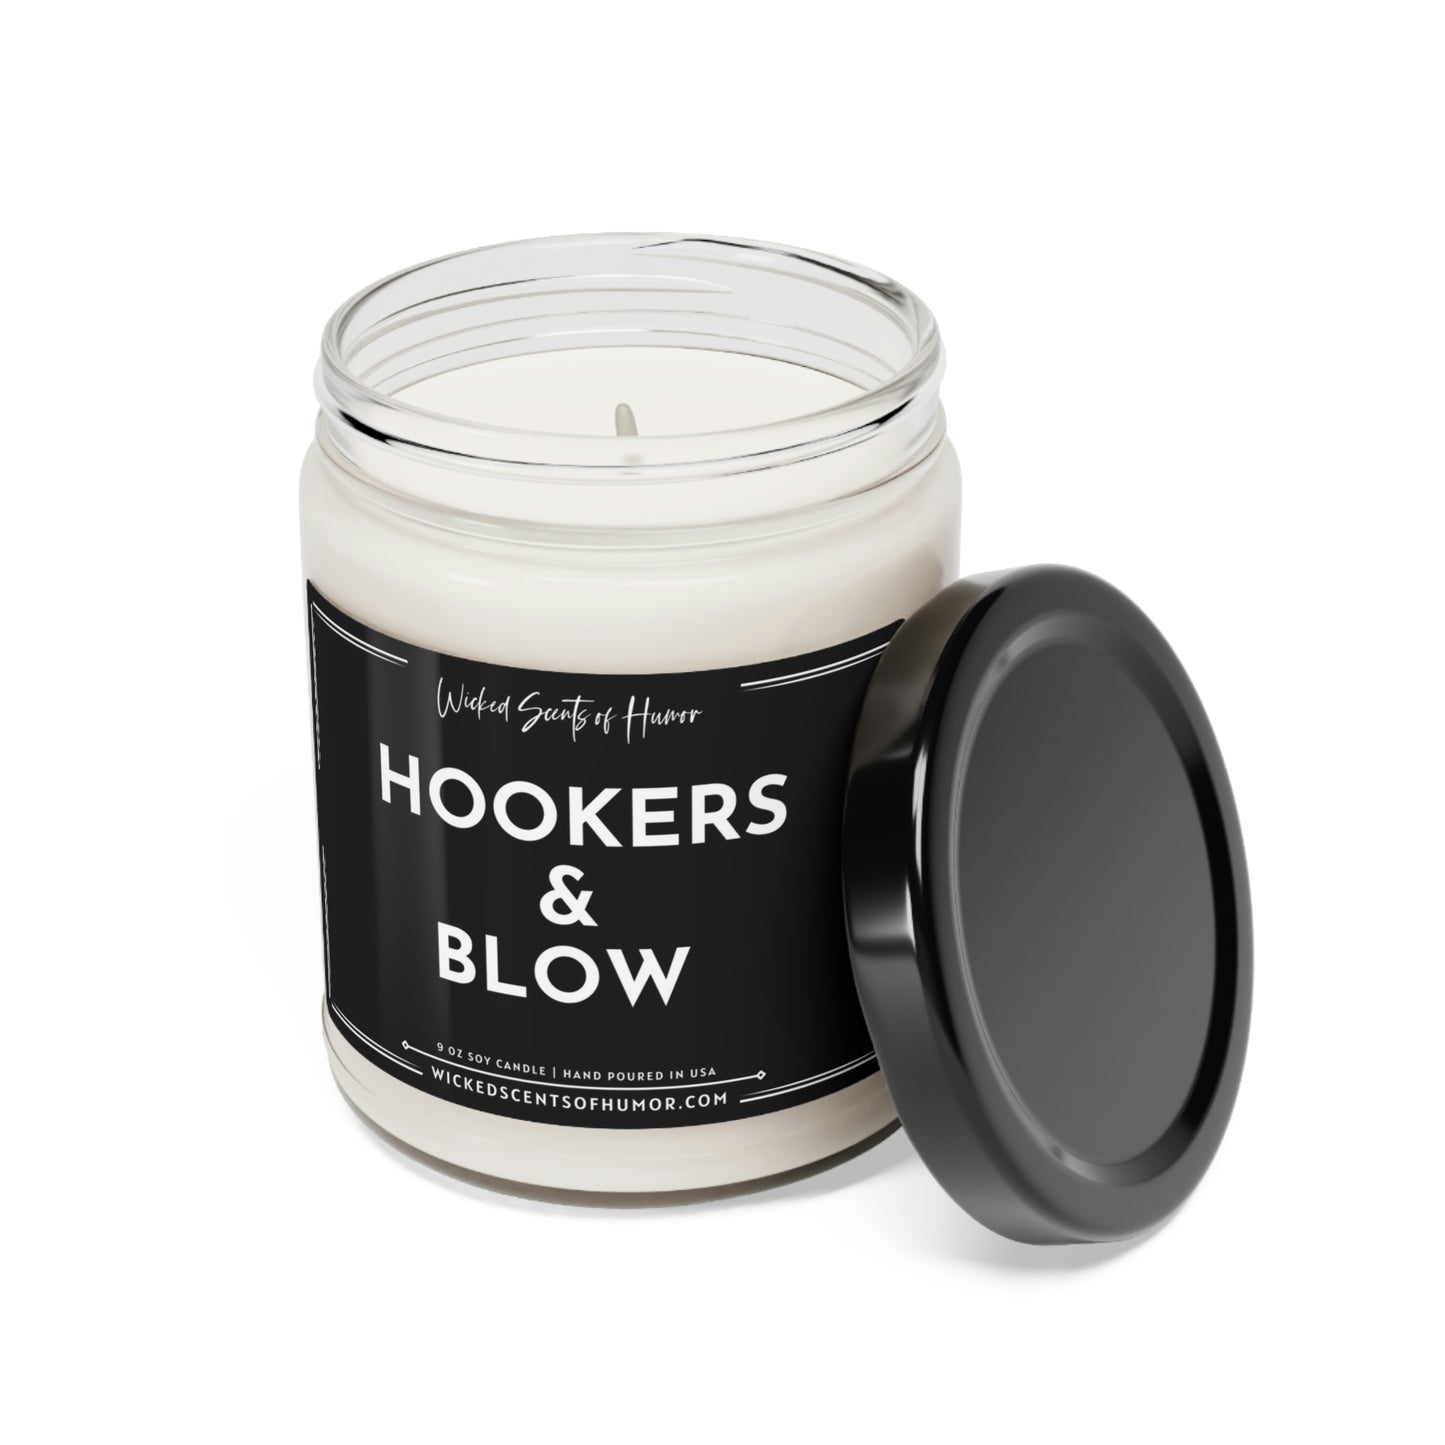 Hookers & Blow Soy Candle, Funny Gift, Gag Gift Idea, Eco-Friendly All Natural Soy Candle, 9oz